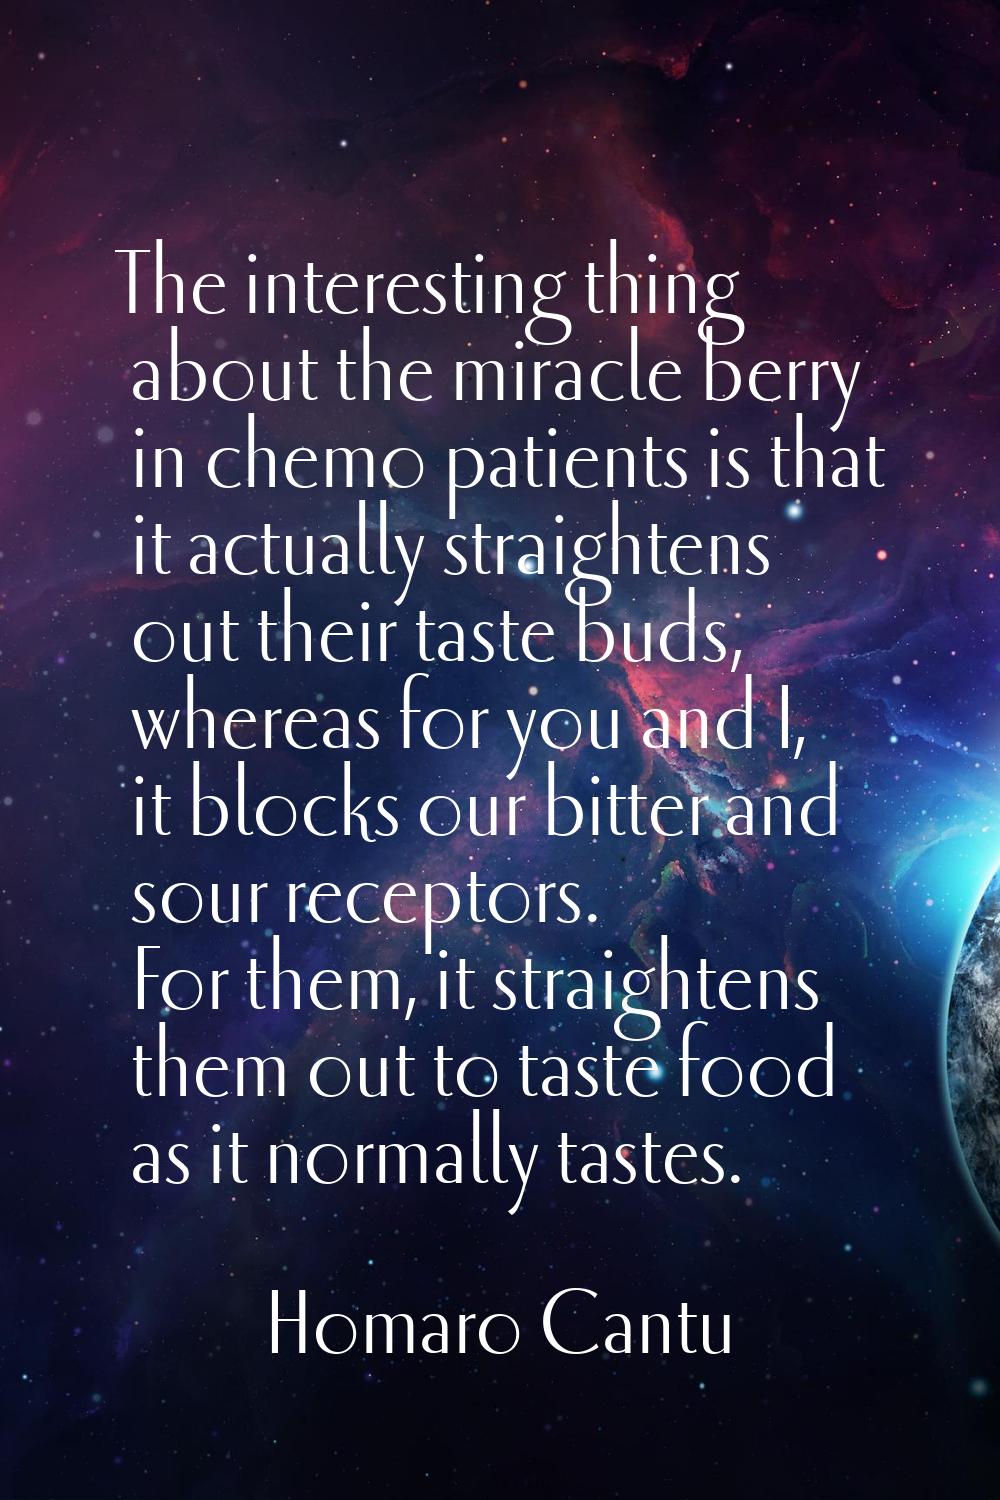 The interesting thing about the miracle berry in chemo patients is that it actually straightens out